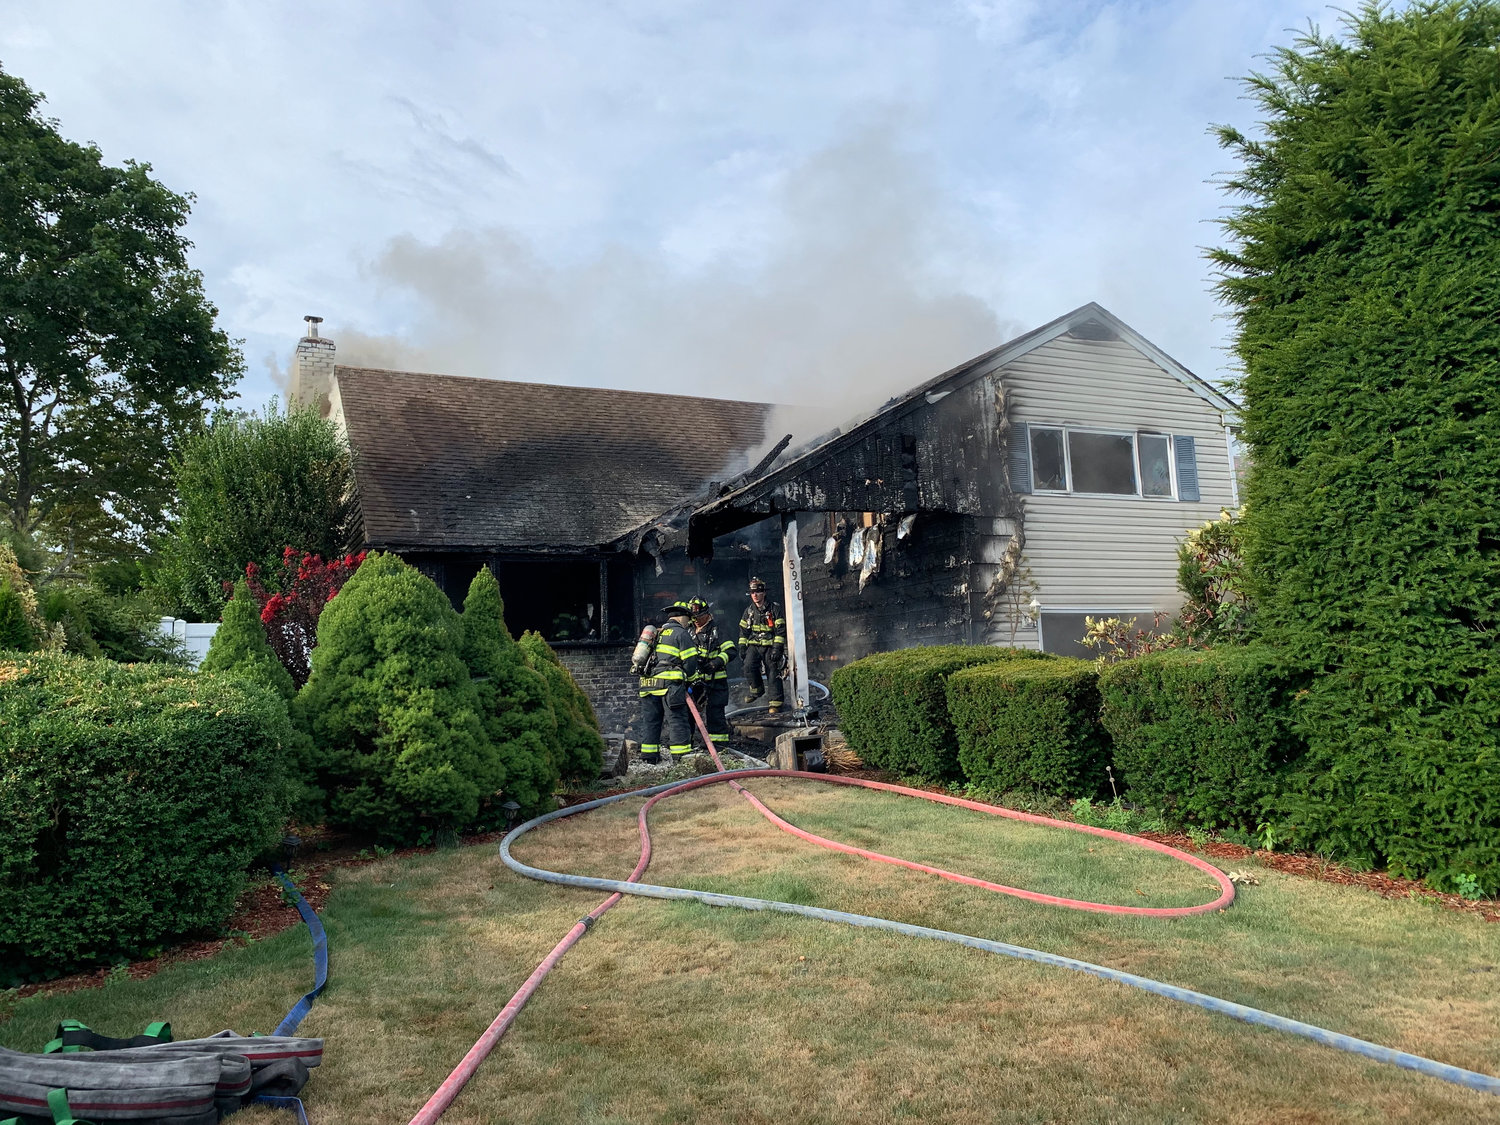 On July 26, there was a large house fire in Seaford. Firefighters from multiple surrounding towns responded to the fire.